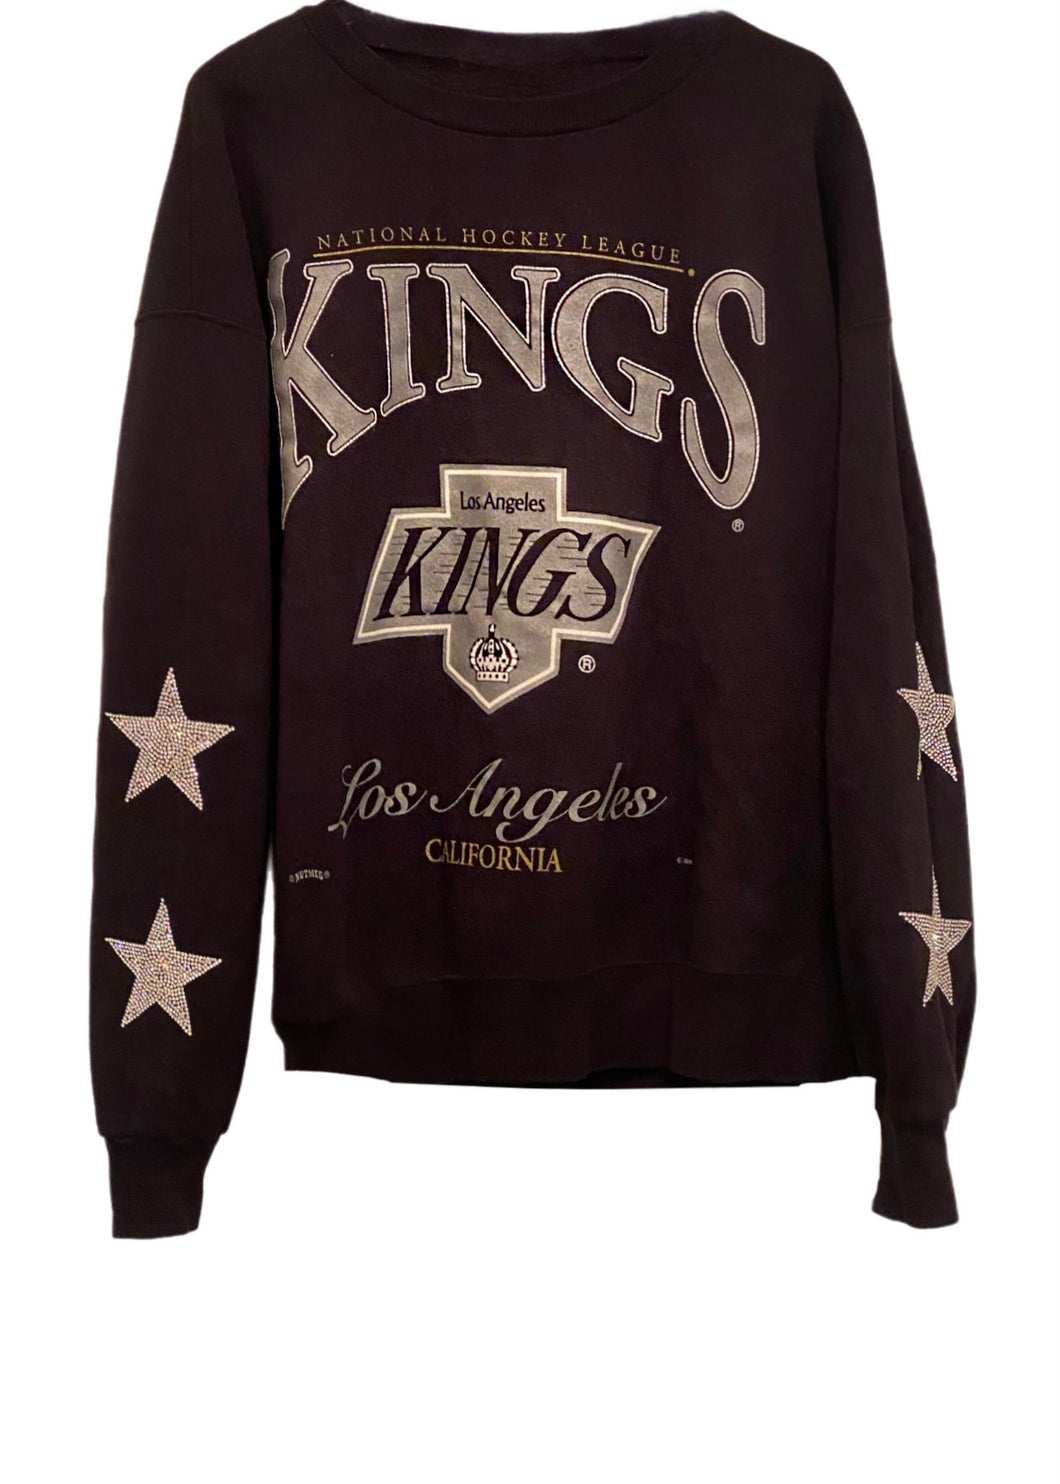 Los Angeles Kings, NHL One of a KIND early 90’s Vintage Sweatshirt with Crystal Star Design